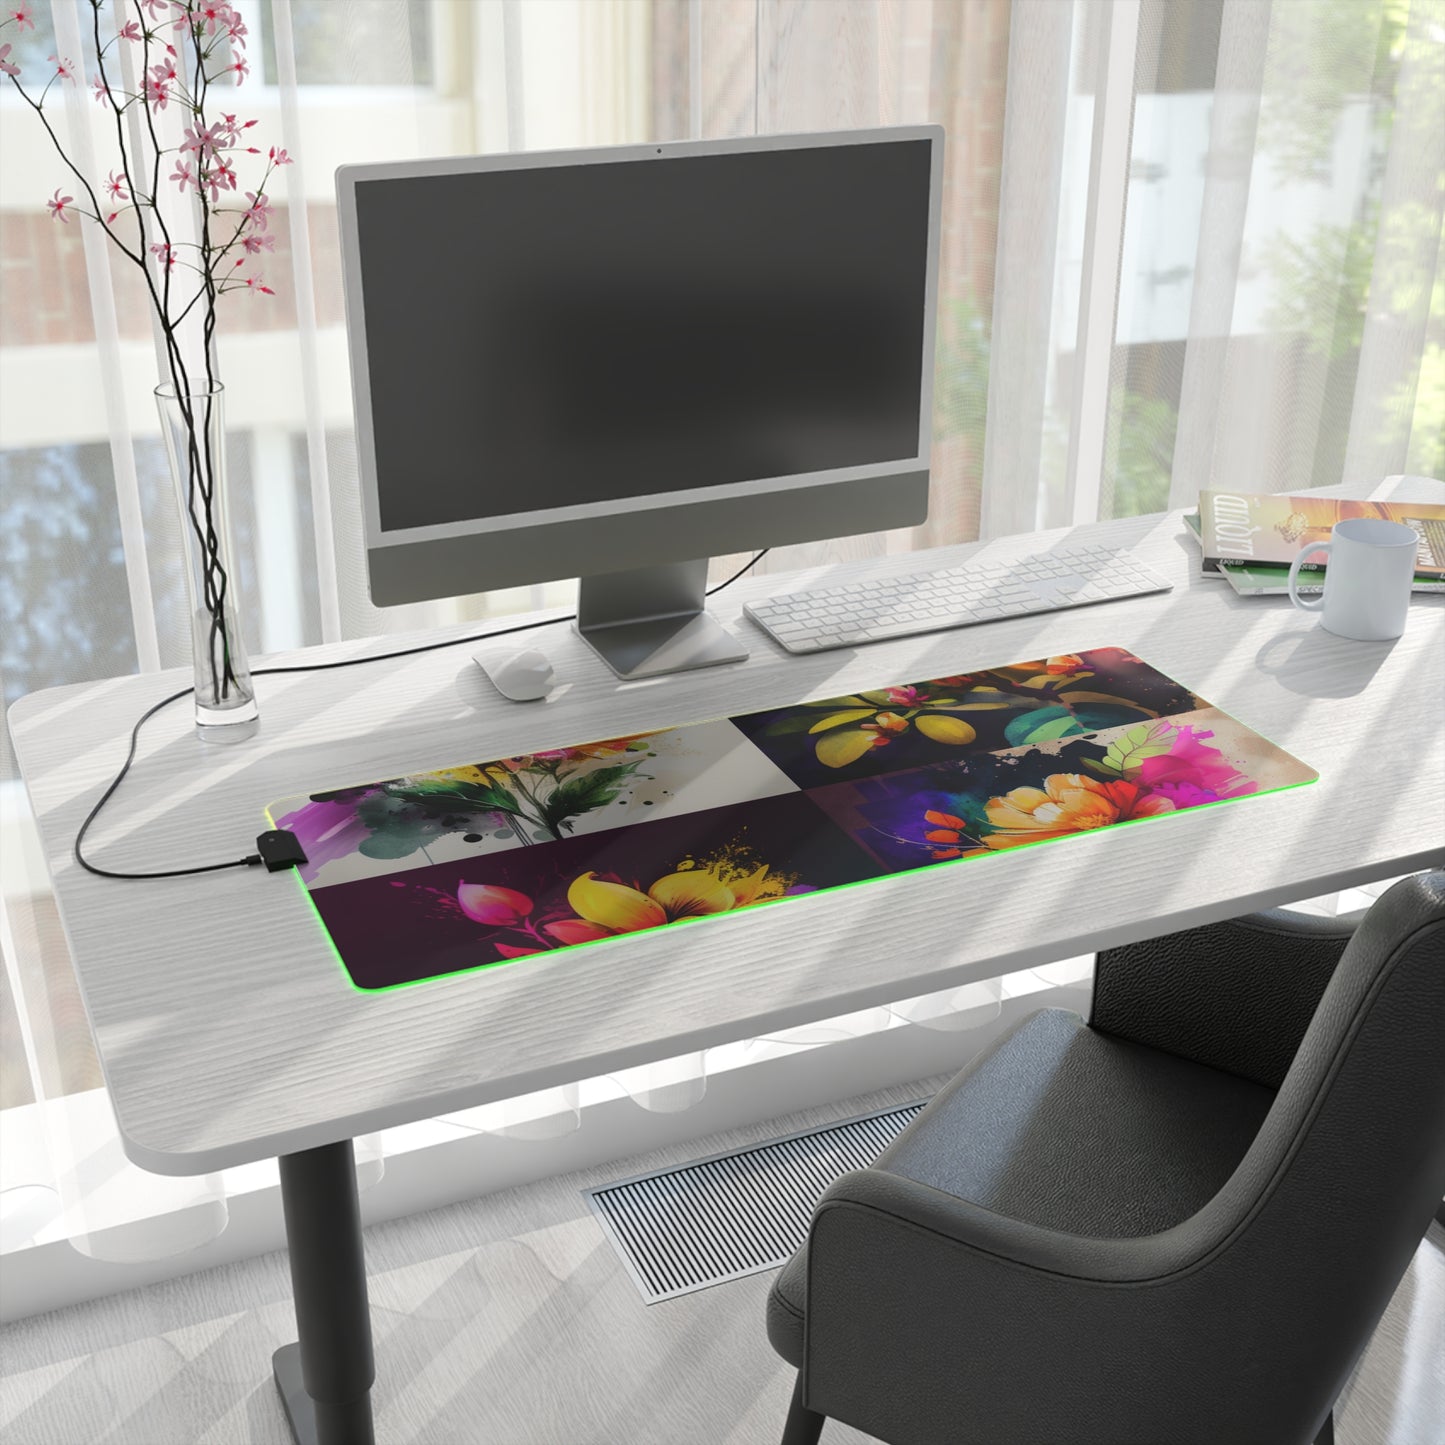 LED Gaming Mouse Pad Bright Spring Flowers 5